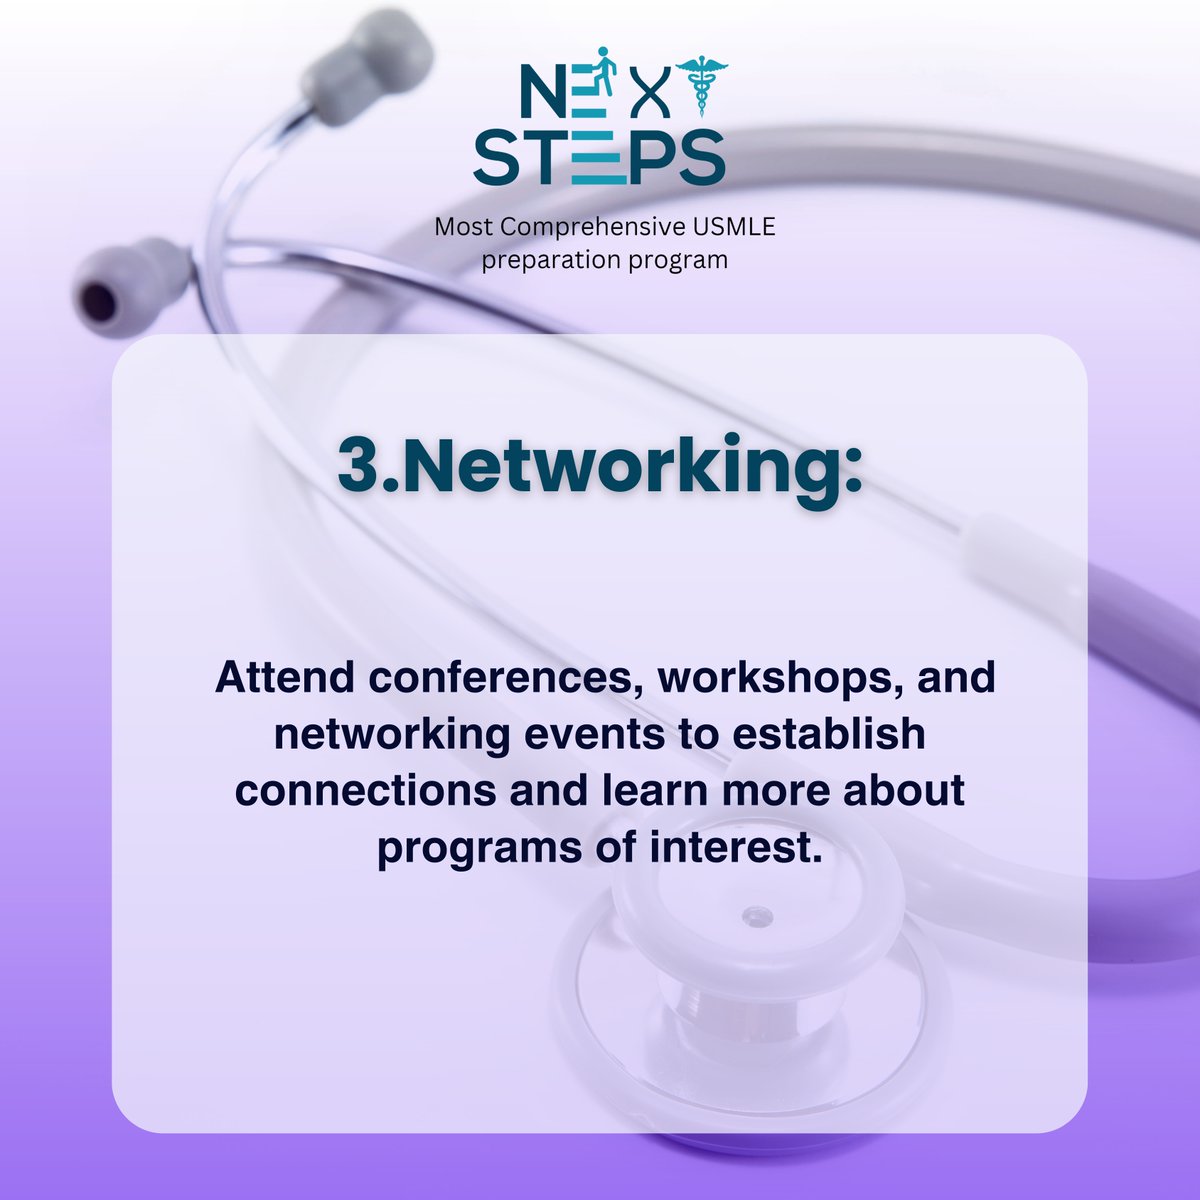 Unlock your path to residency success with our proven strategies! 💼
For USMLE  Residency Match: nextstepscareer.com/match-strategy/

#USMLE #Residency #residencymatch #usmlematch #match2024 #nextsteps #nextstepsusmle